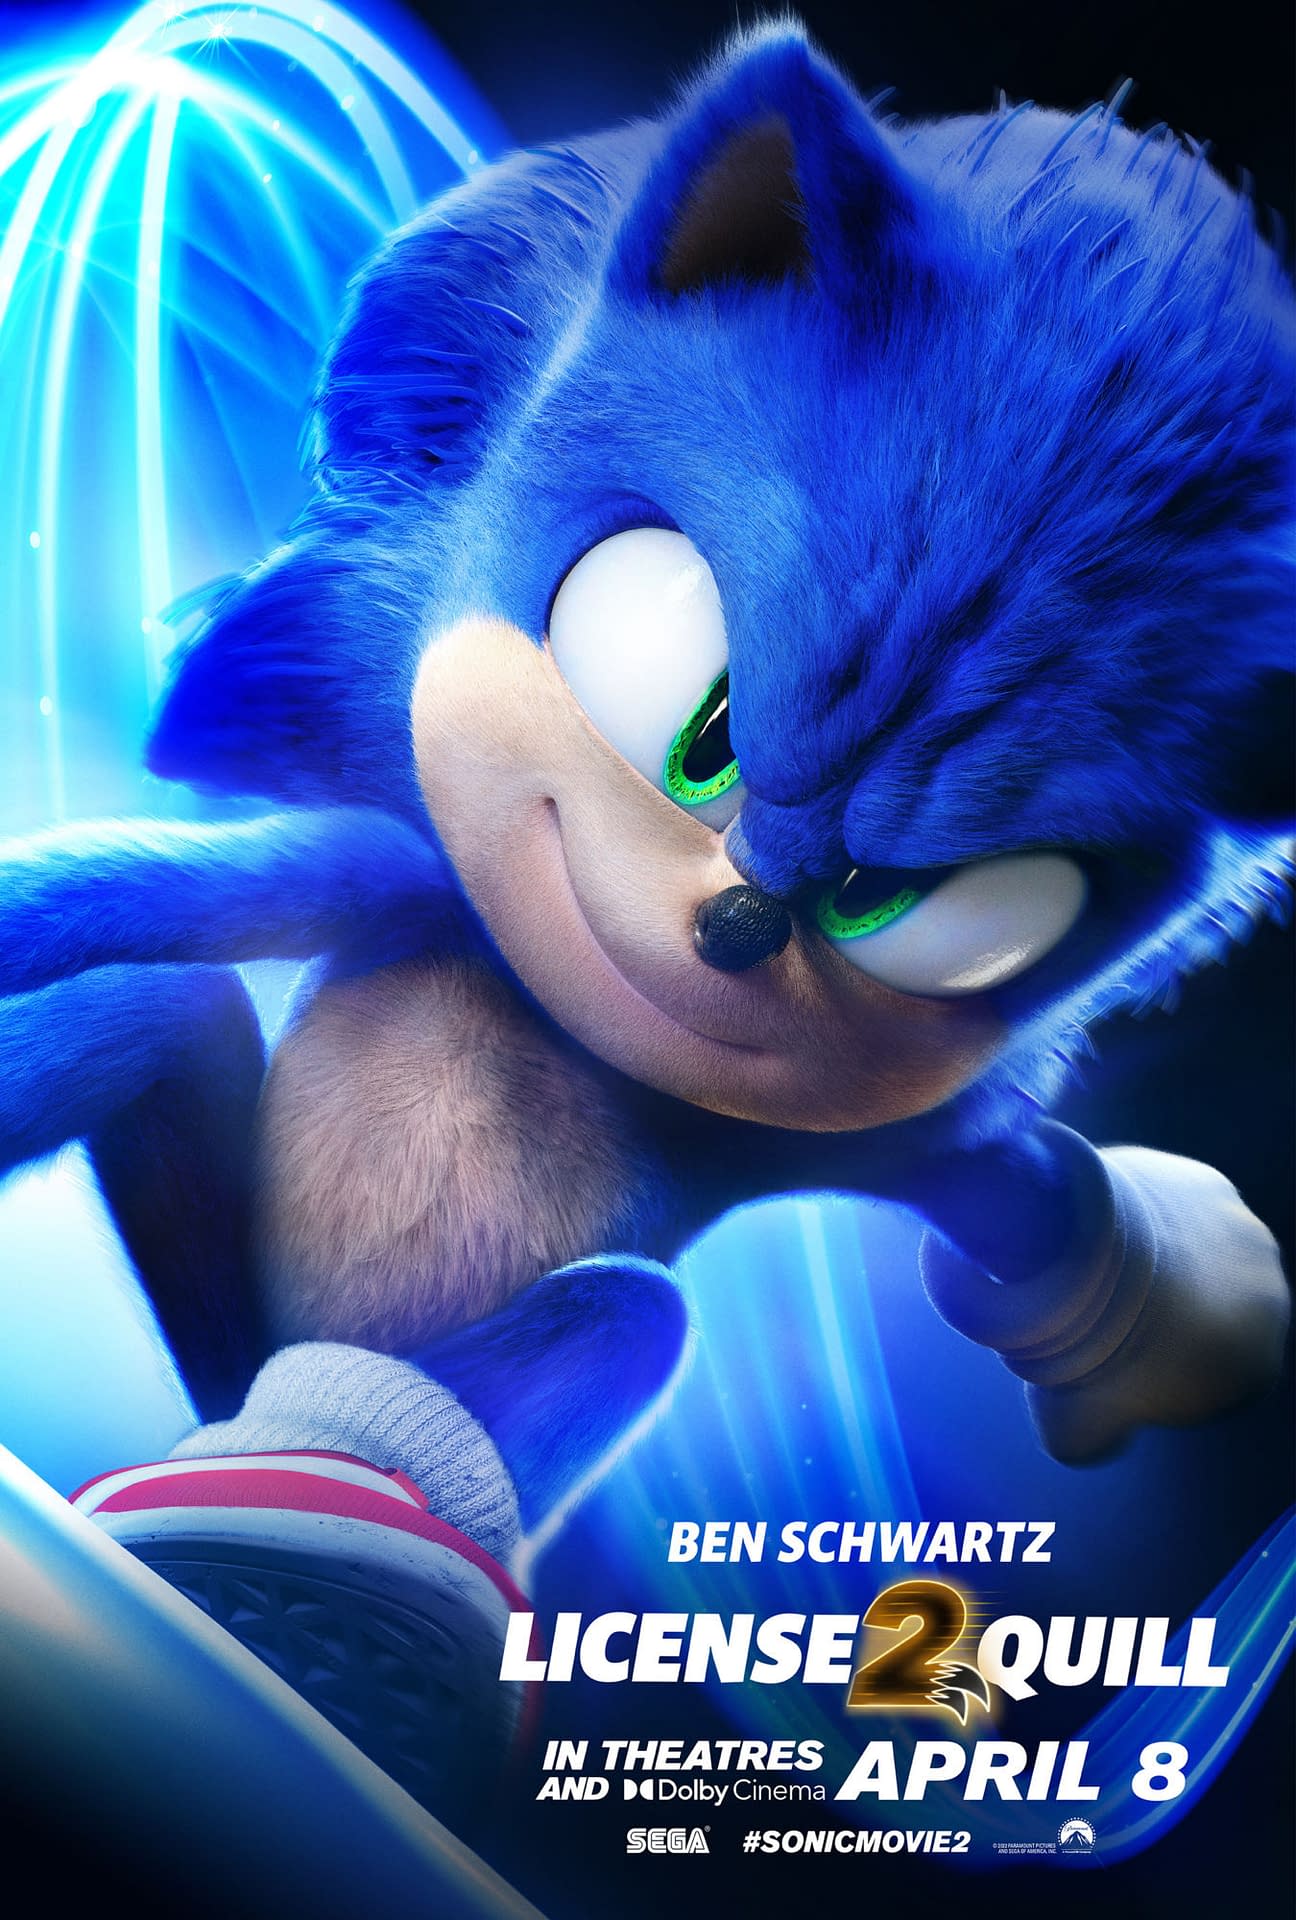 3 Character Posters Released for Sonic the Hedgehog 2